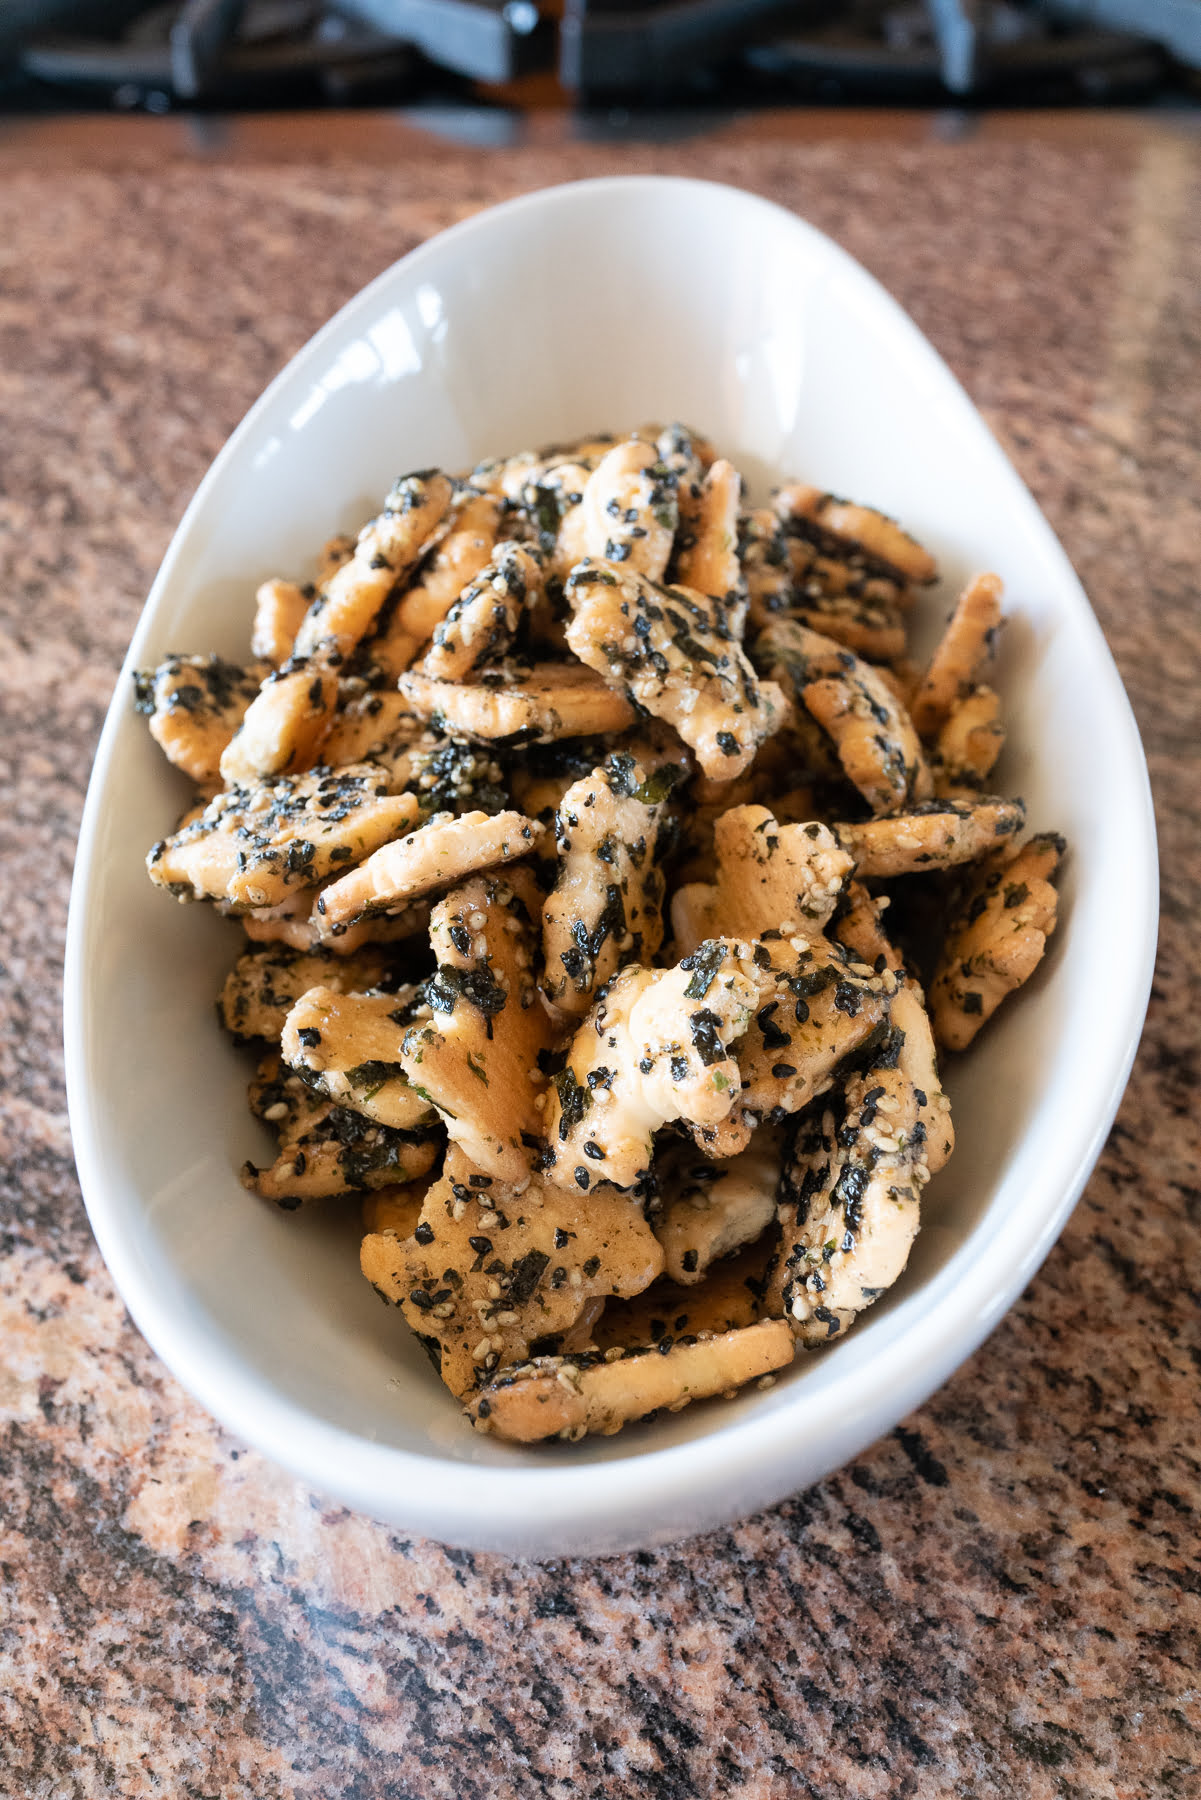 Furikake animal crackers in a bowl, ready for snacking.